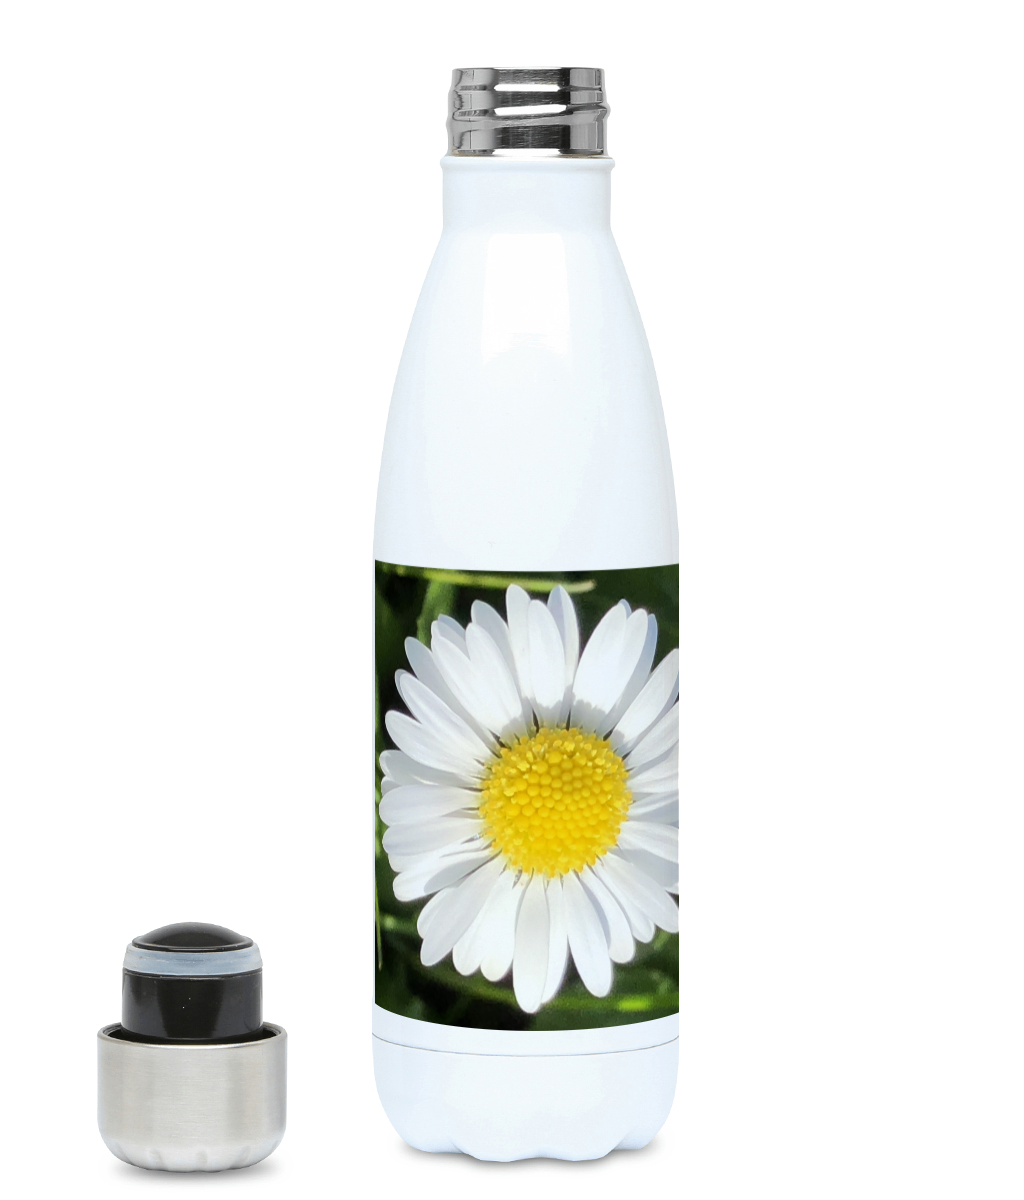 "Completing the almost perfect circle 2" White Daisy Flower 500ml Water Bottle - Nature of Flowers